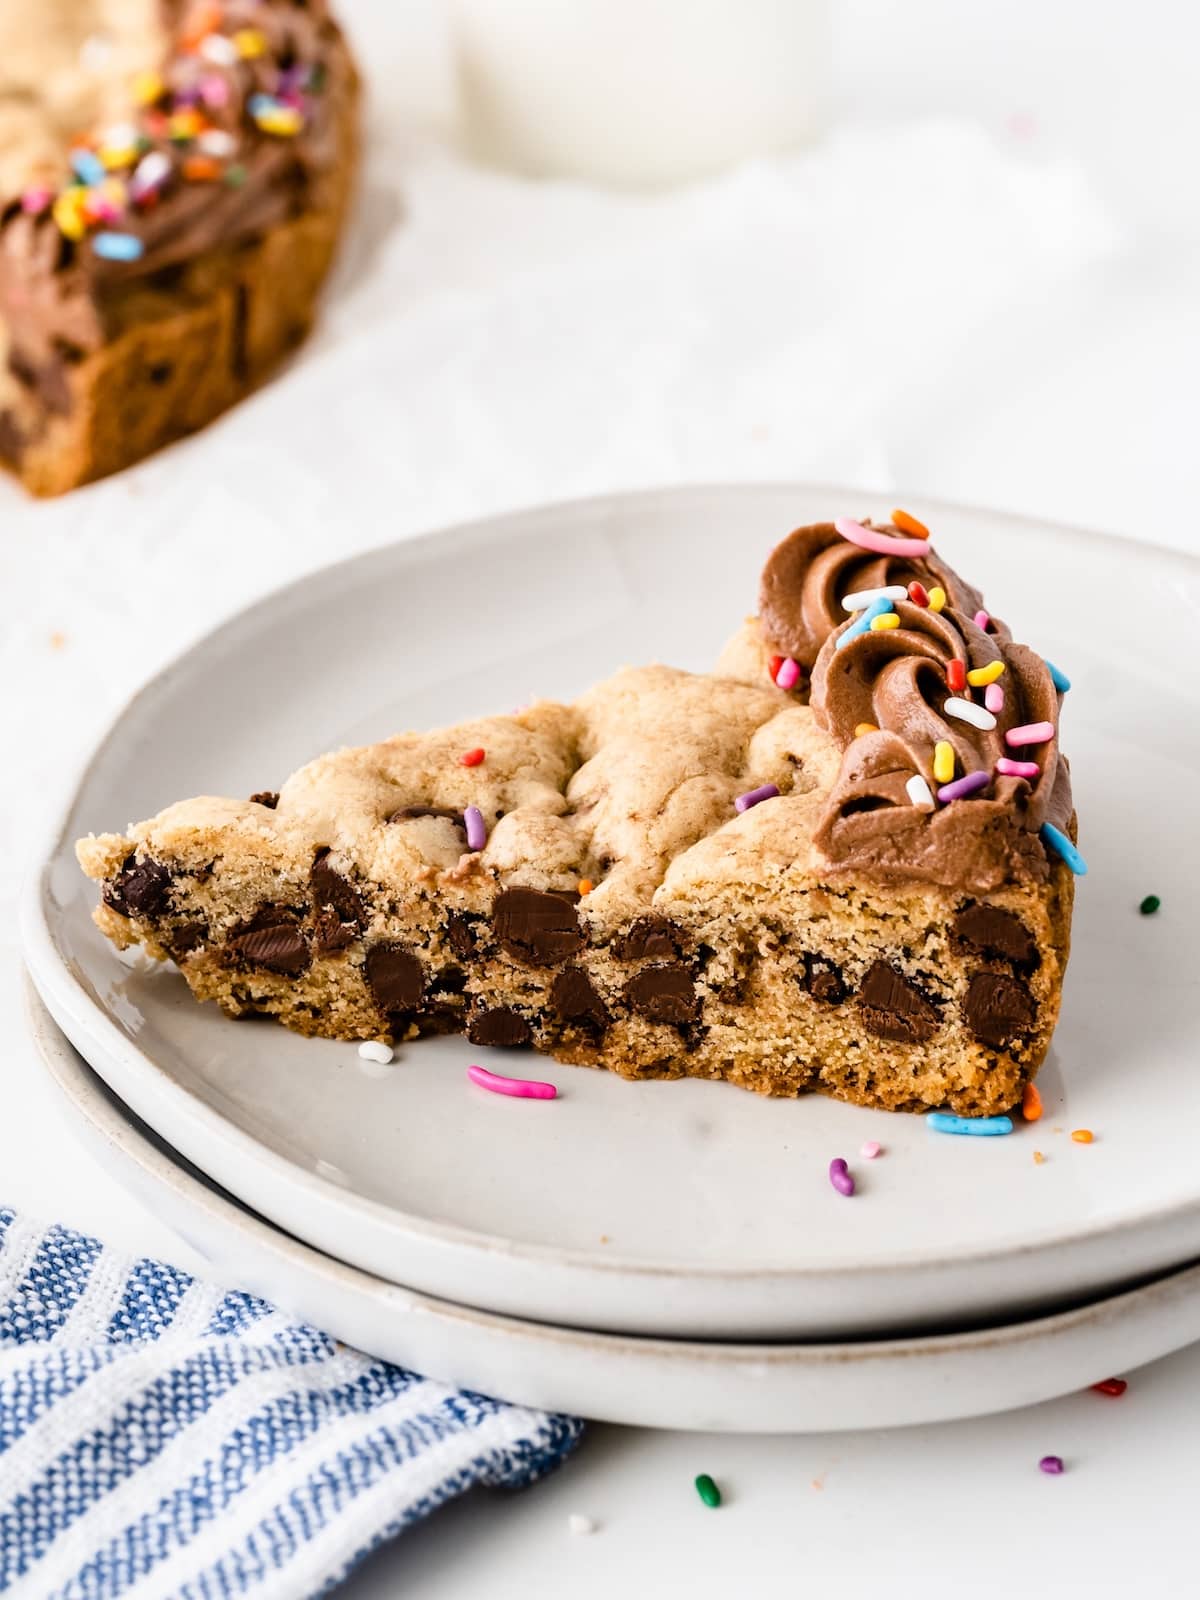 giant chocolate chip cookies with chocolate frosting and sprinkles on top.